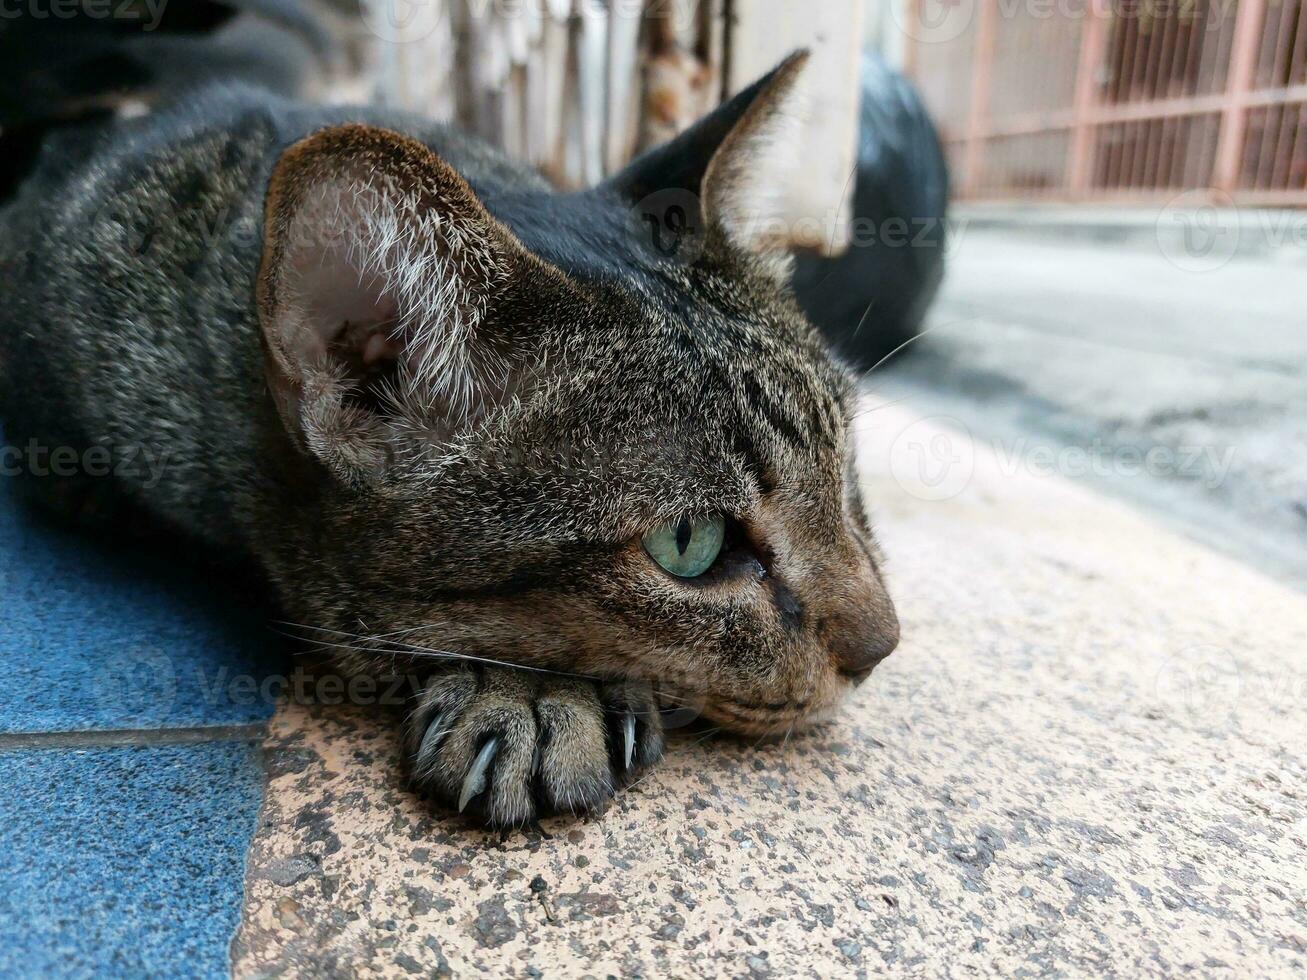 Tabby cat lay on its paws and was looking at something photo